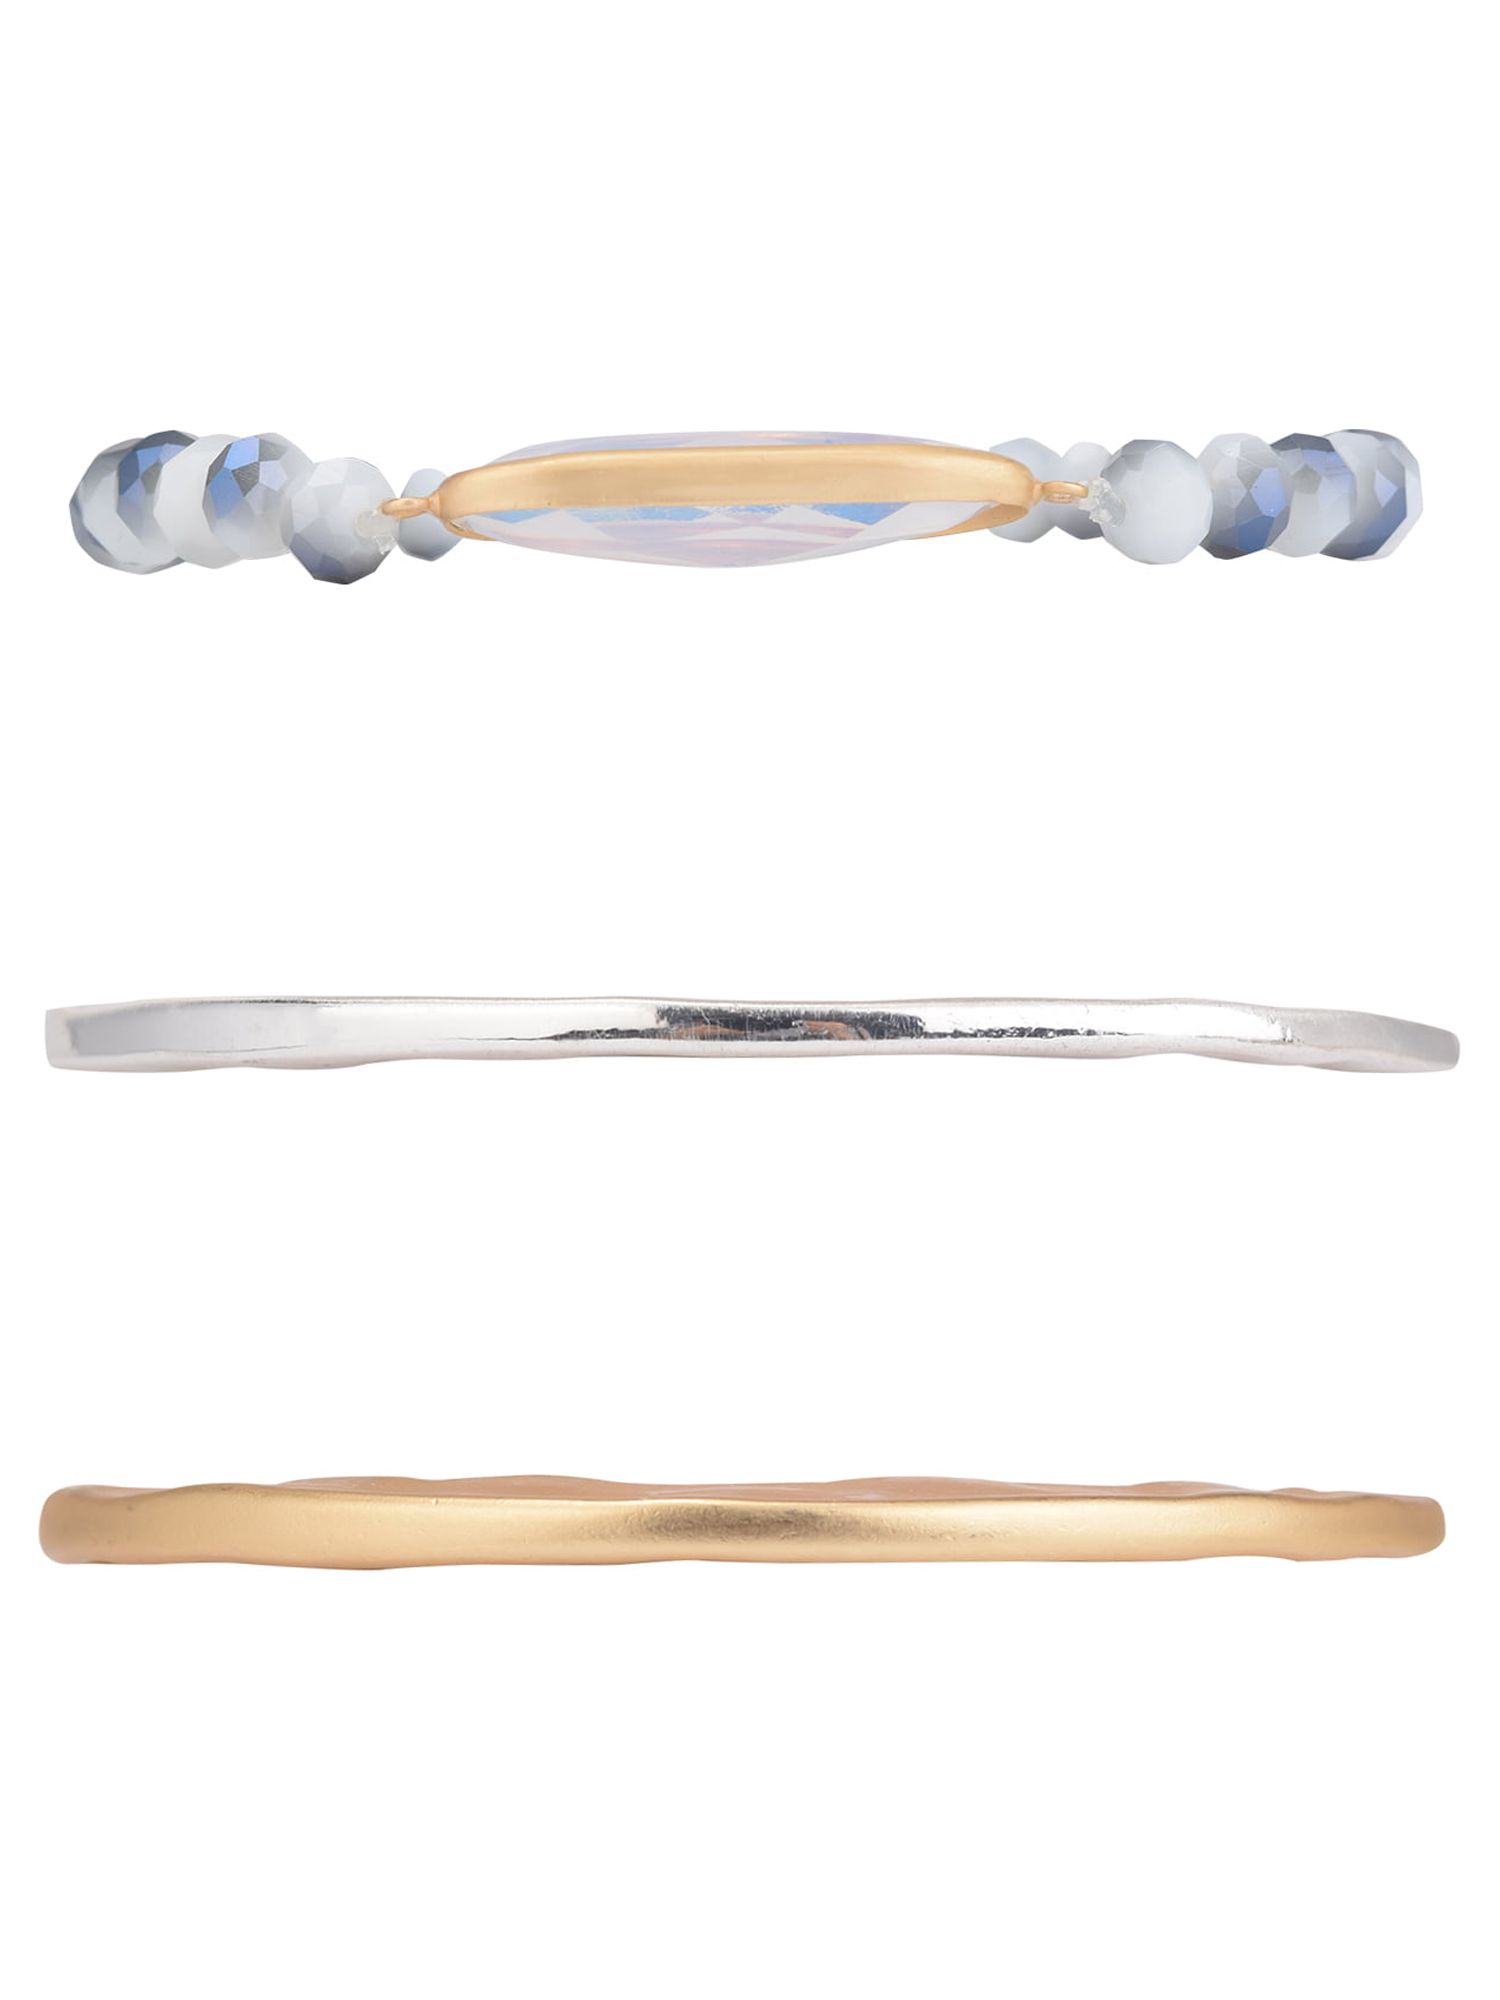 The Pioneer Woman Hammered Gold and Blue Tone Beaded Bangle Bracelet Set, 5 Pack - image 4 of 5